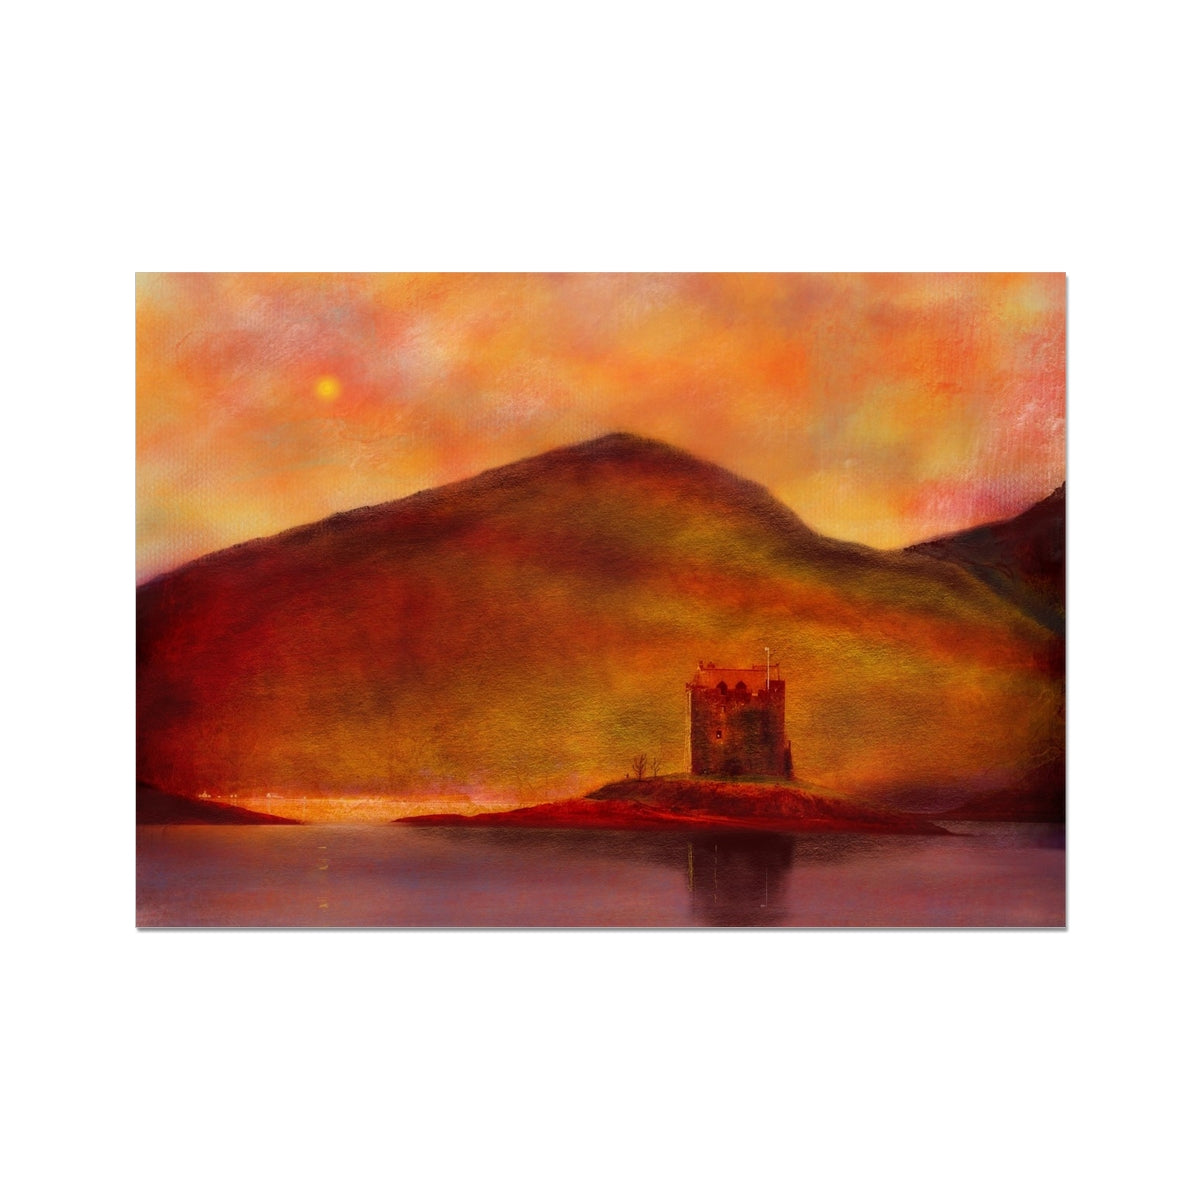 Castle Stalker Sunset Painting | Fine Art Prints From Scotland-Unframed Prints-Historic & Iconic Scotland Art Gallery-A2 Landscape-Paintings, Prints, Homeware, Art Gifts From Scotland By Scottish Artist Kevin Hunter